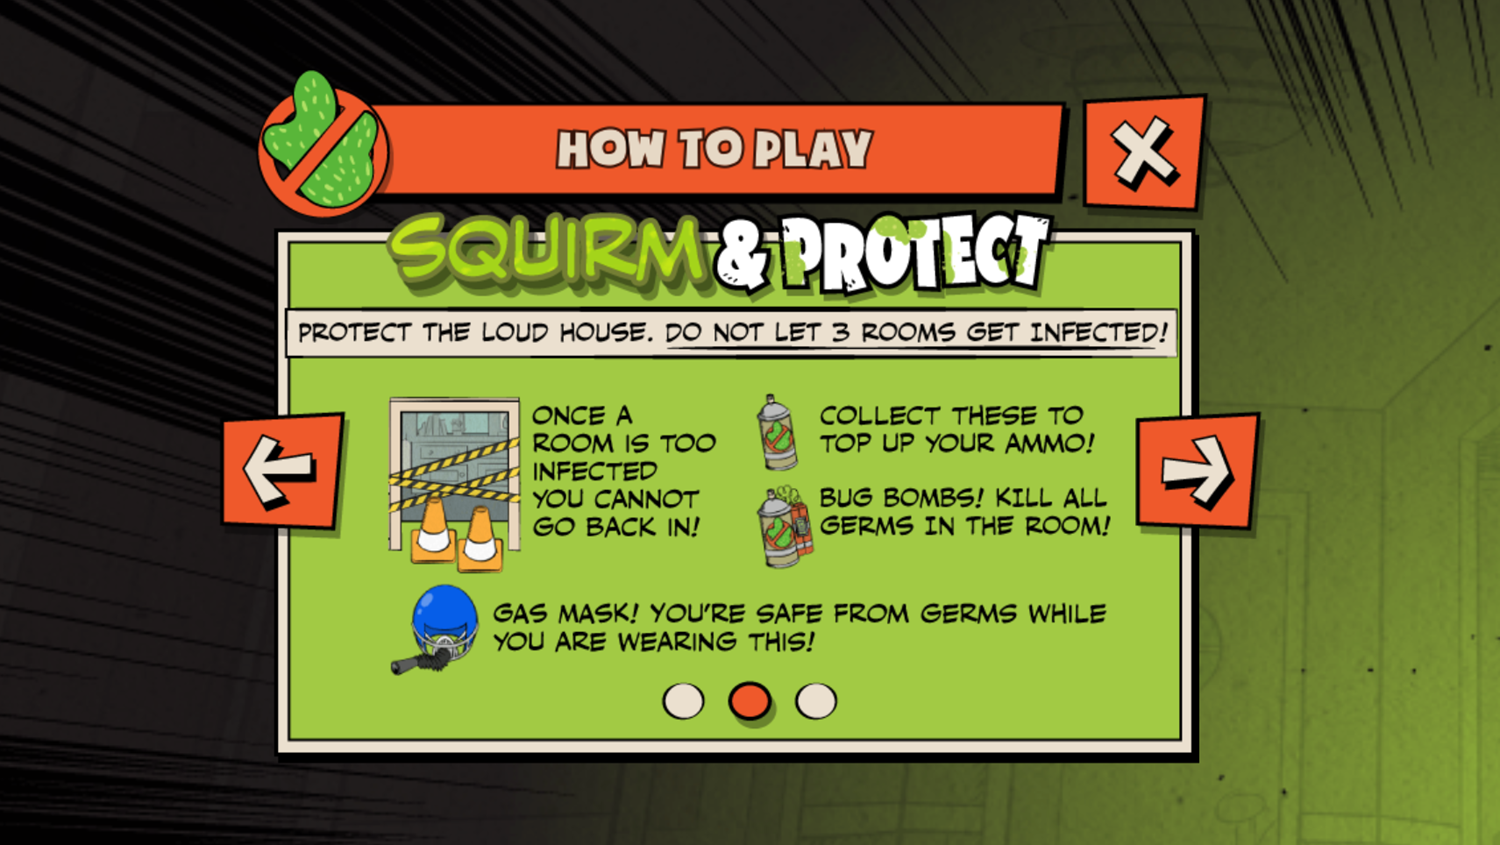 Loud House Germ Squirmish Game Squirm and Protect Instructions Screenshot.